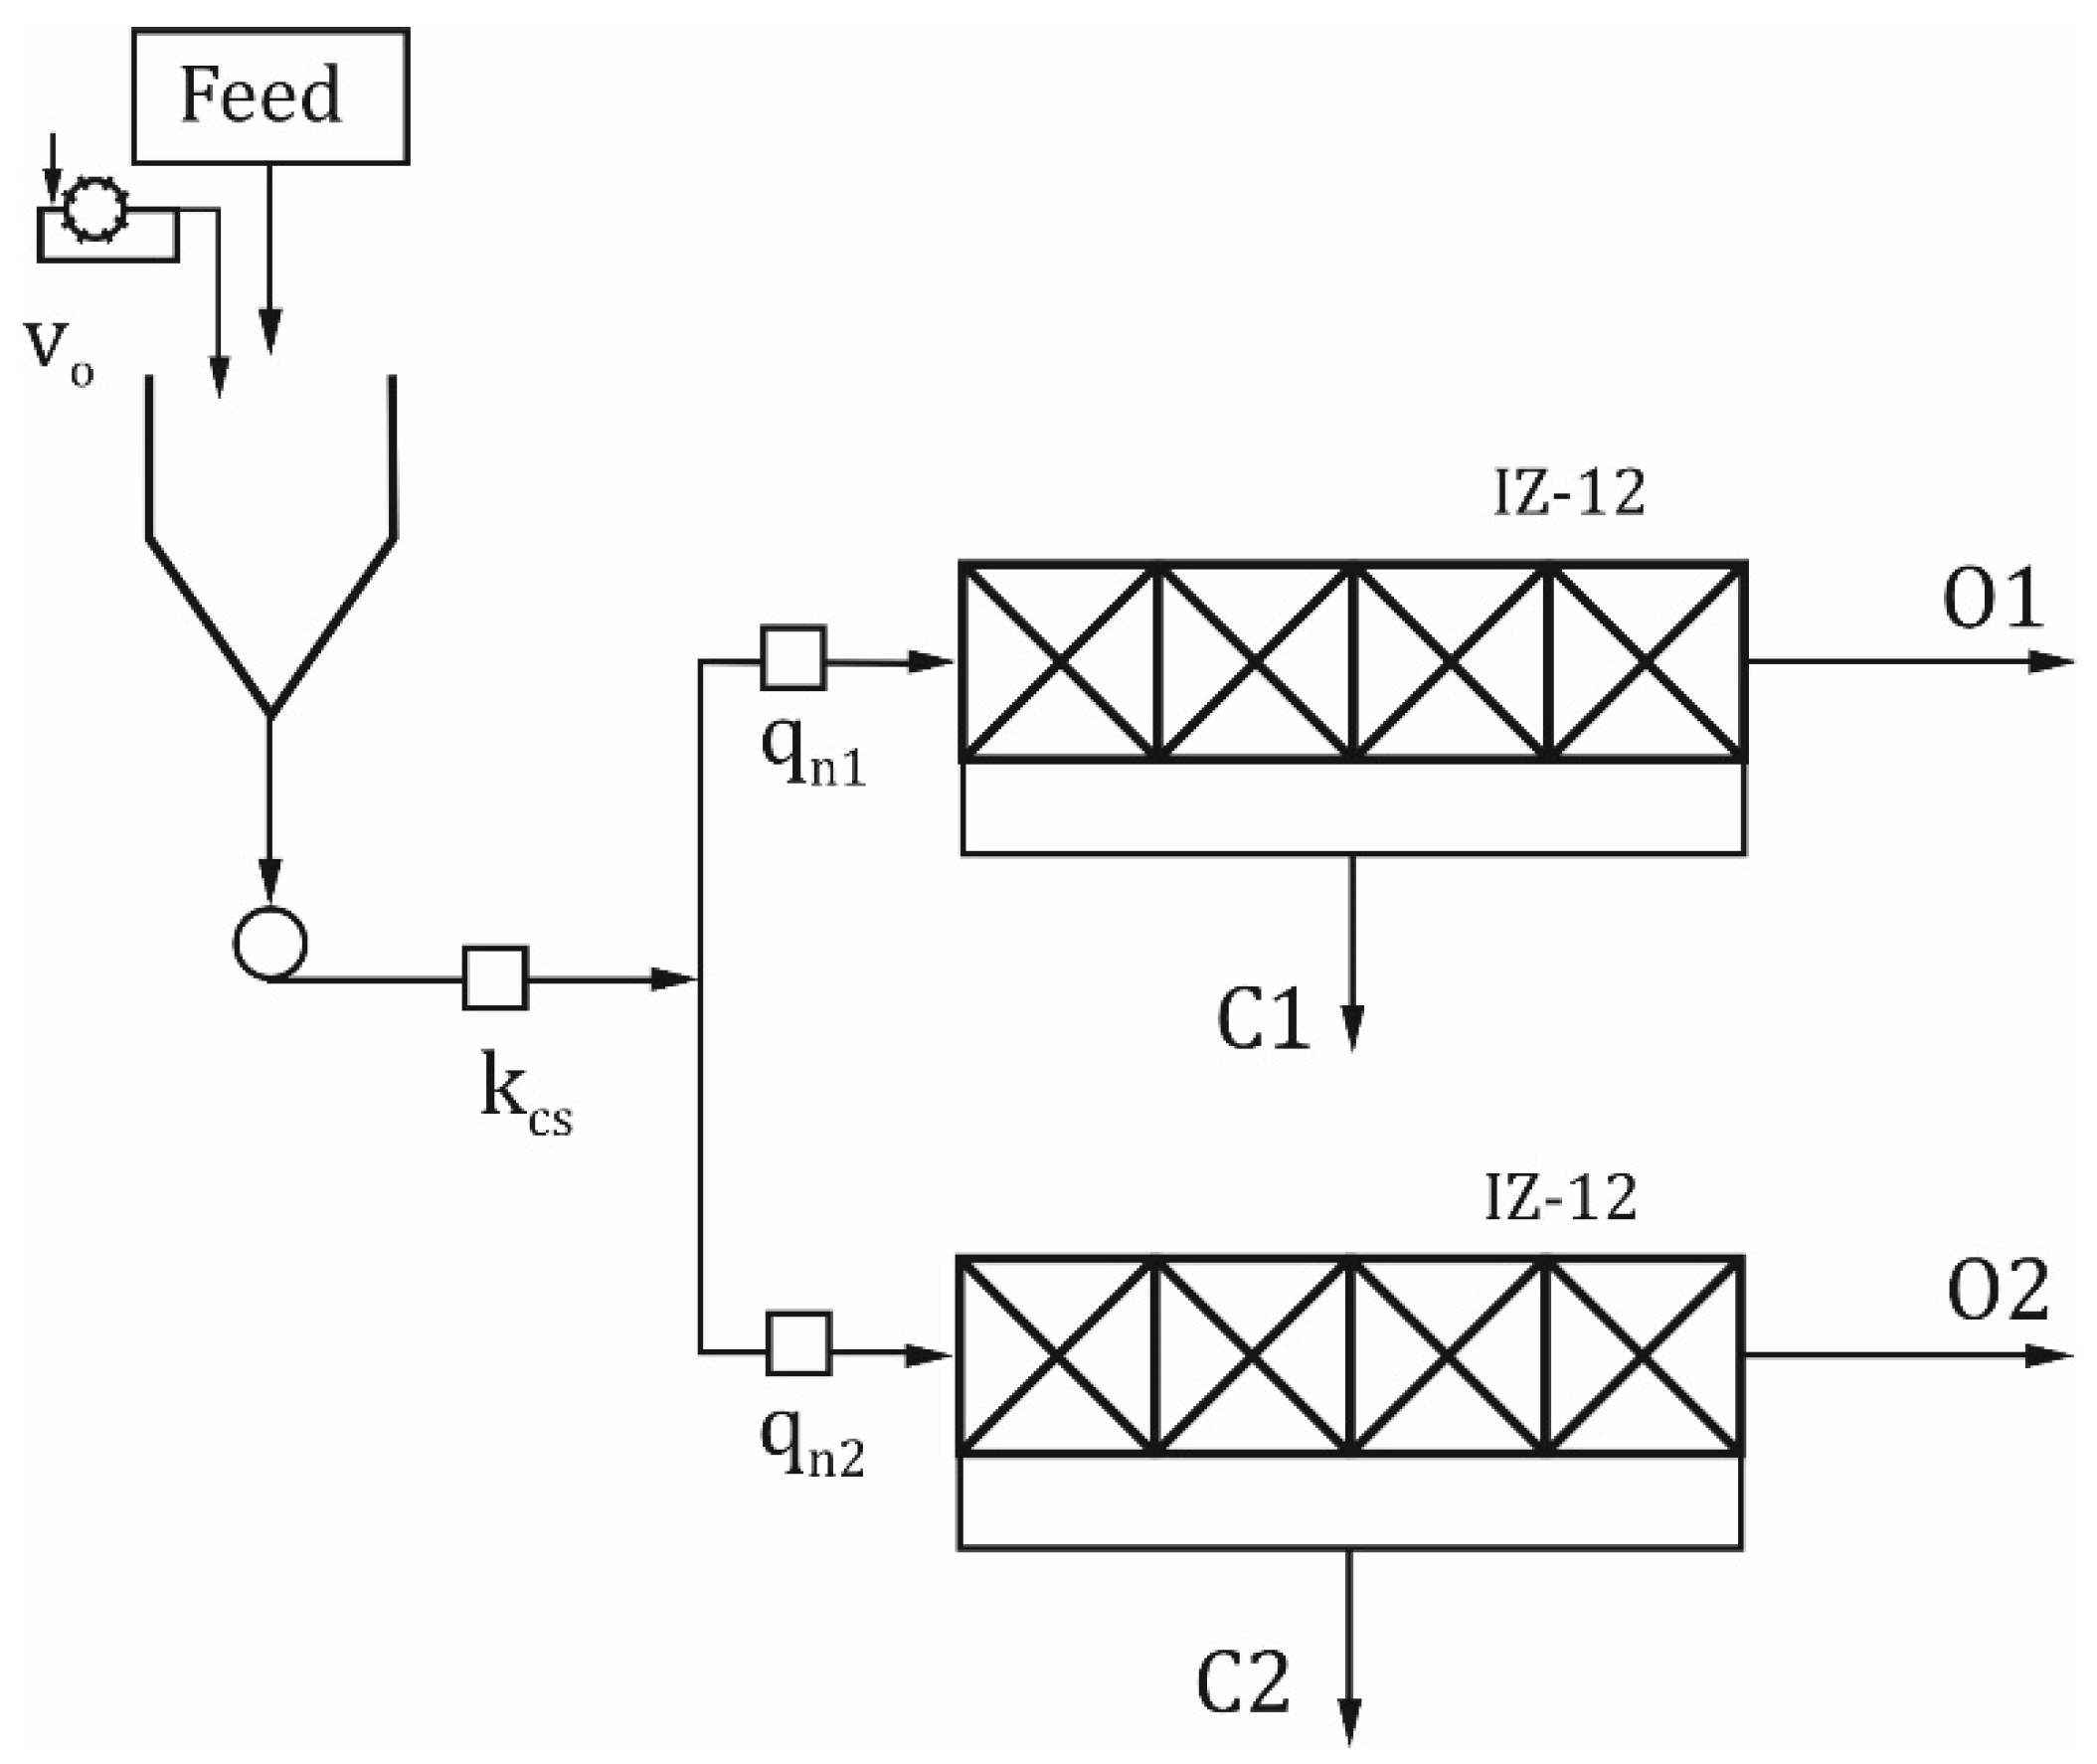 Energies | Free Full-Text | Application of the ARMA Model to Describe and  Forecast the Flotation Feed Solids Flow Rate | HTML